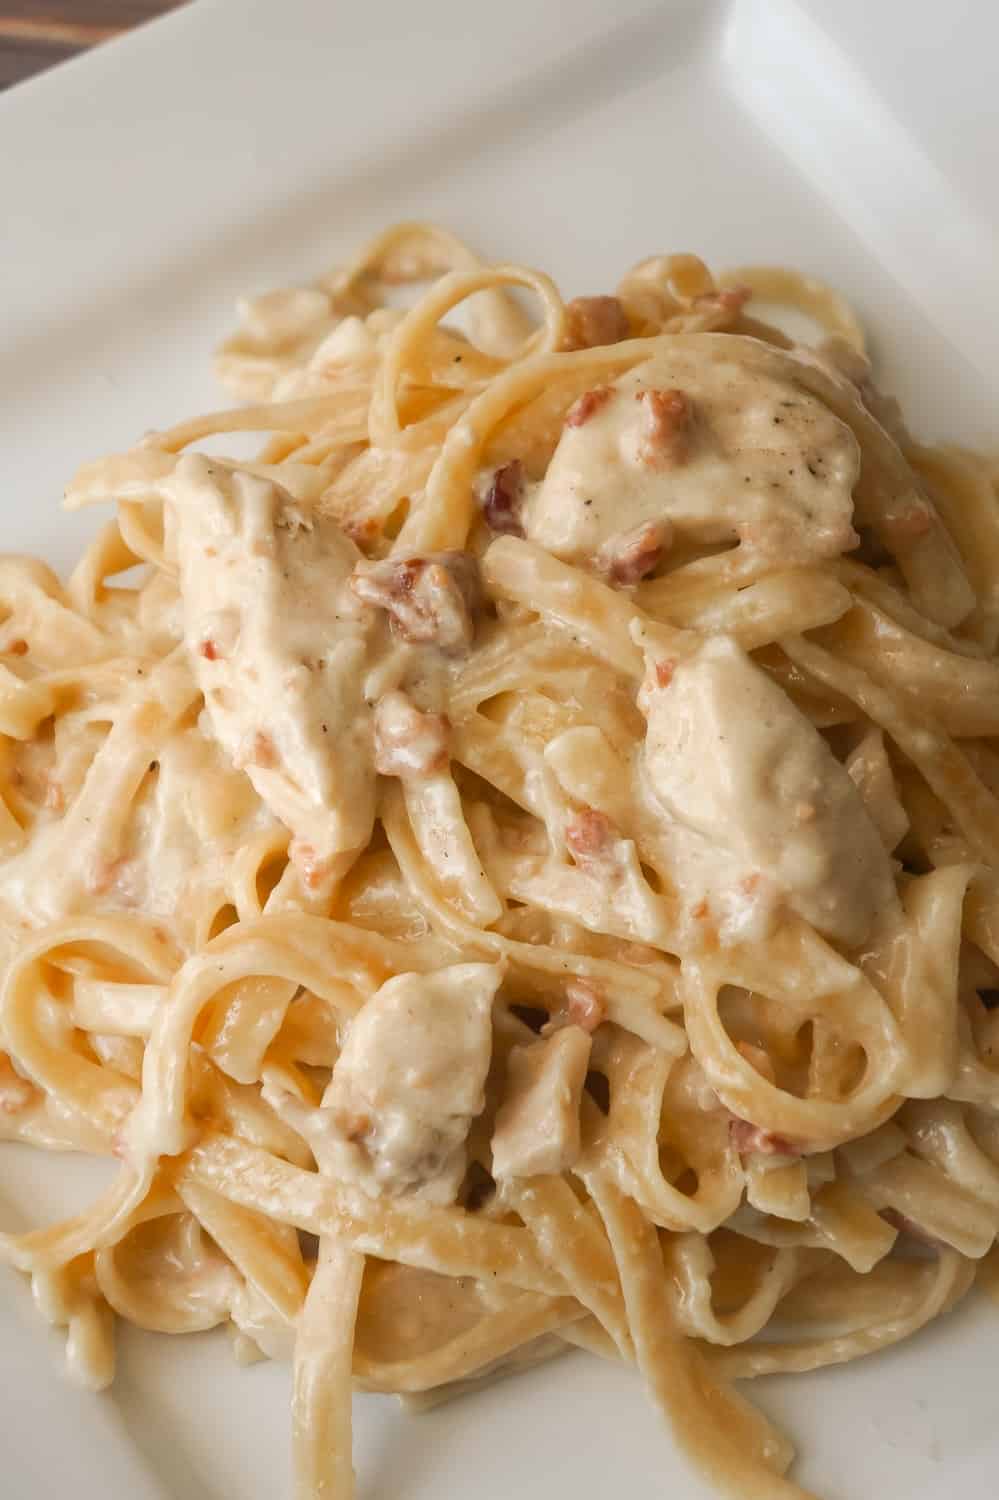 Instant Pot Bacon & Chicken Fettuccine Alfredo is an easy dinner recipe using an Instant Pot. This delicious pasta is coated in a creamy garlic Alfredo sauce and loaded with chicken and bacon.